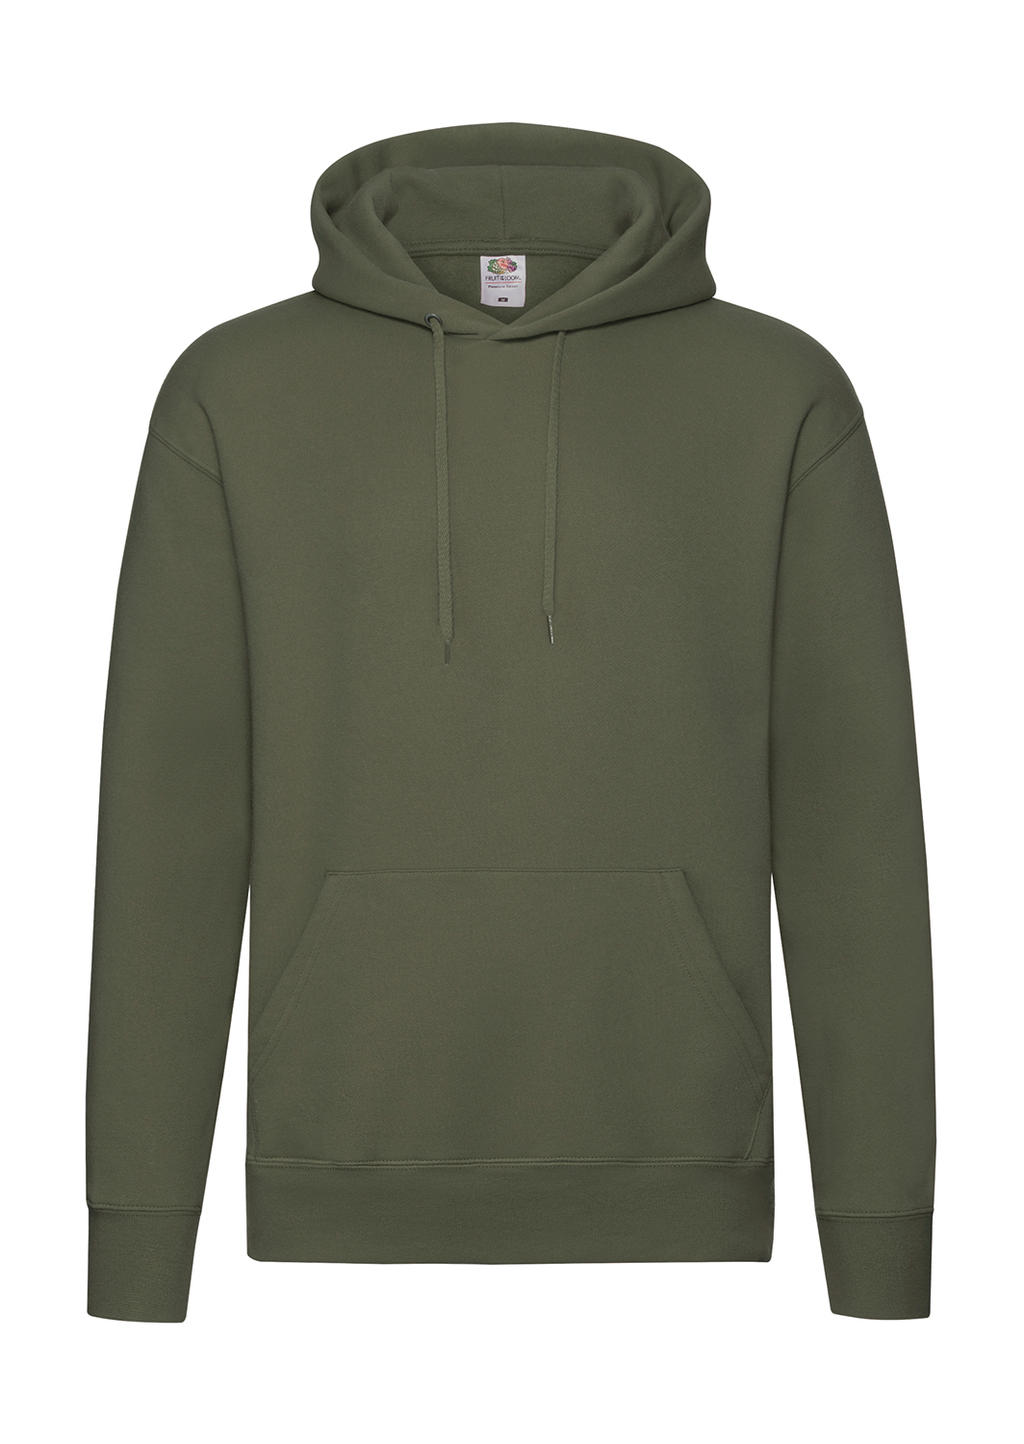  Premium Hooded Sweat in Farbe Classic Olive